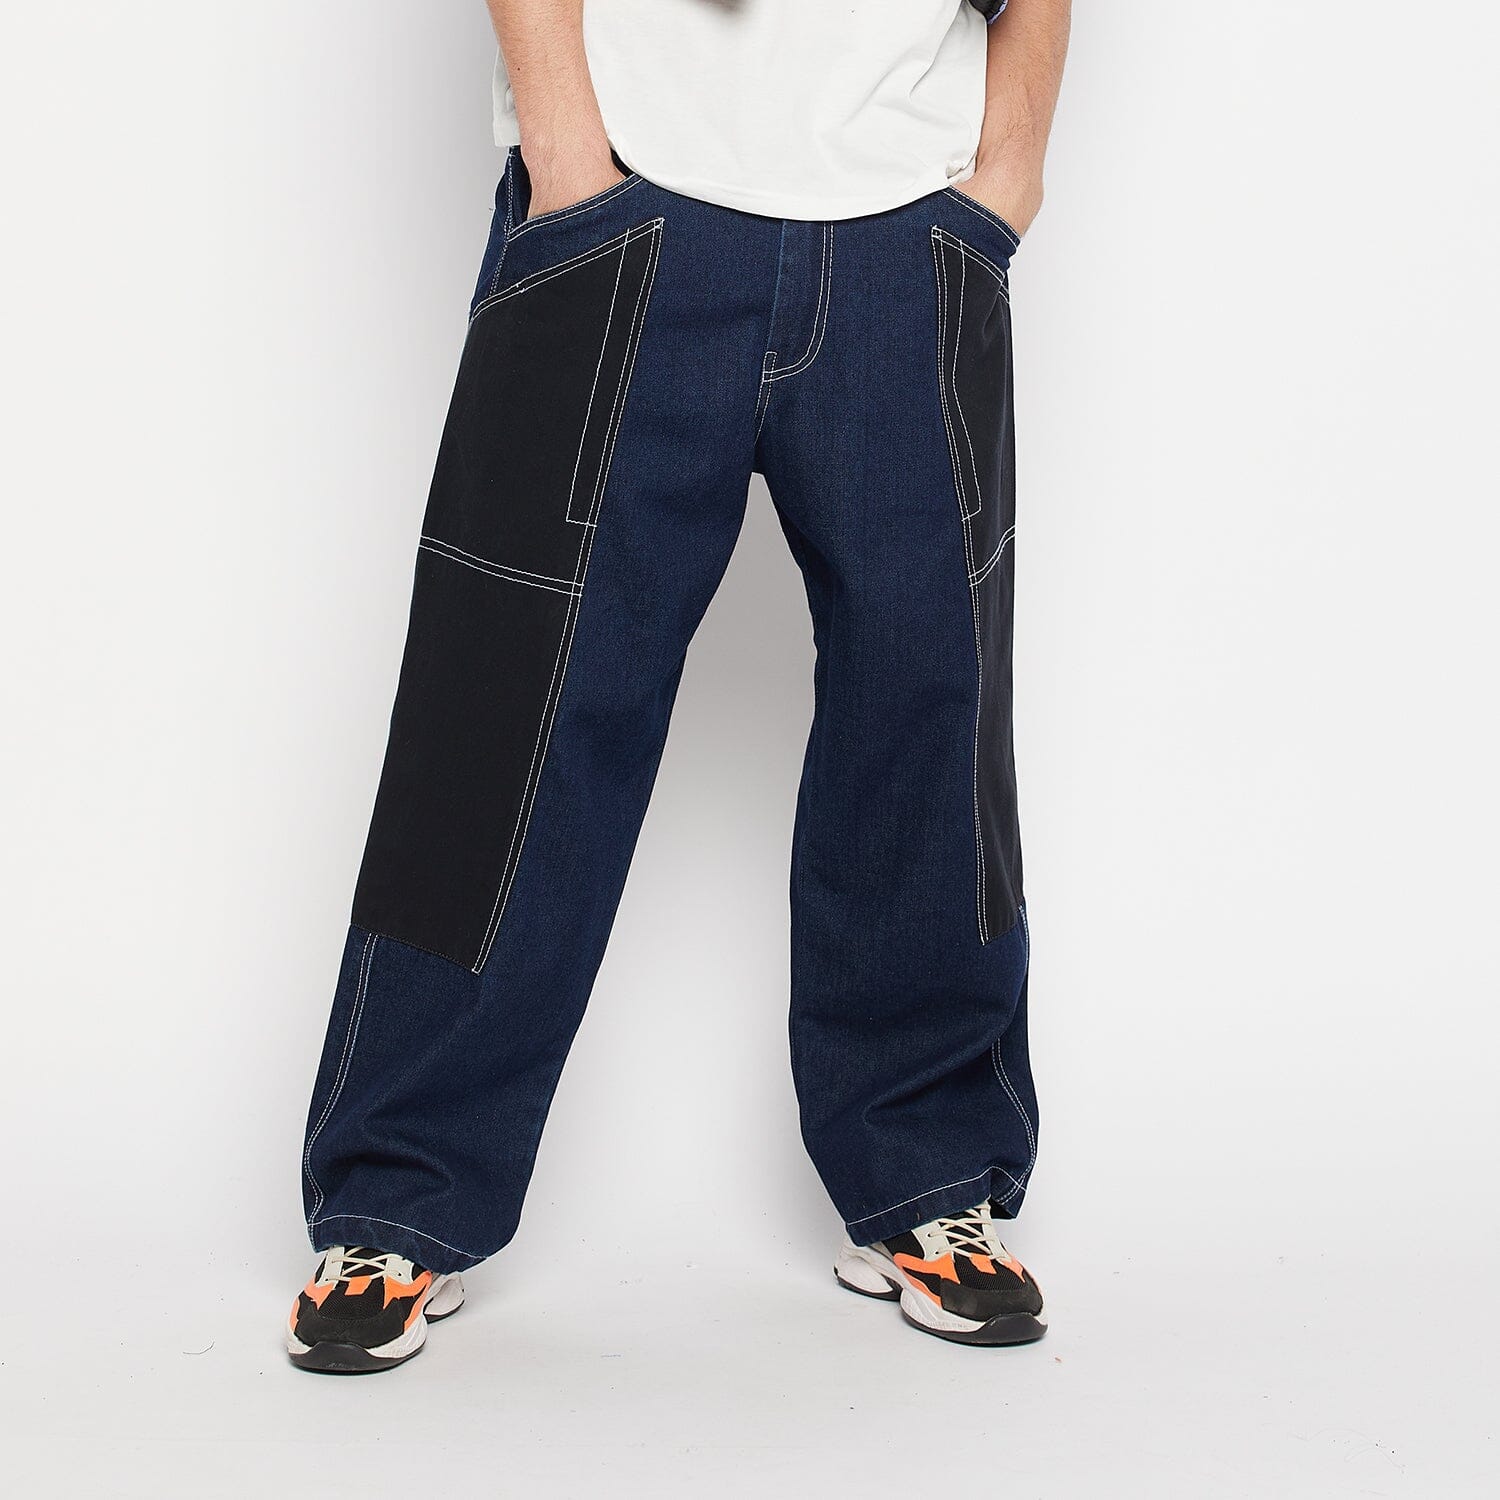 adidas Kerwin Frost Baggy Track Pants  Blue  adidas India